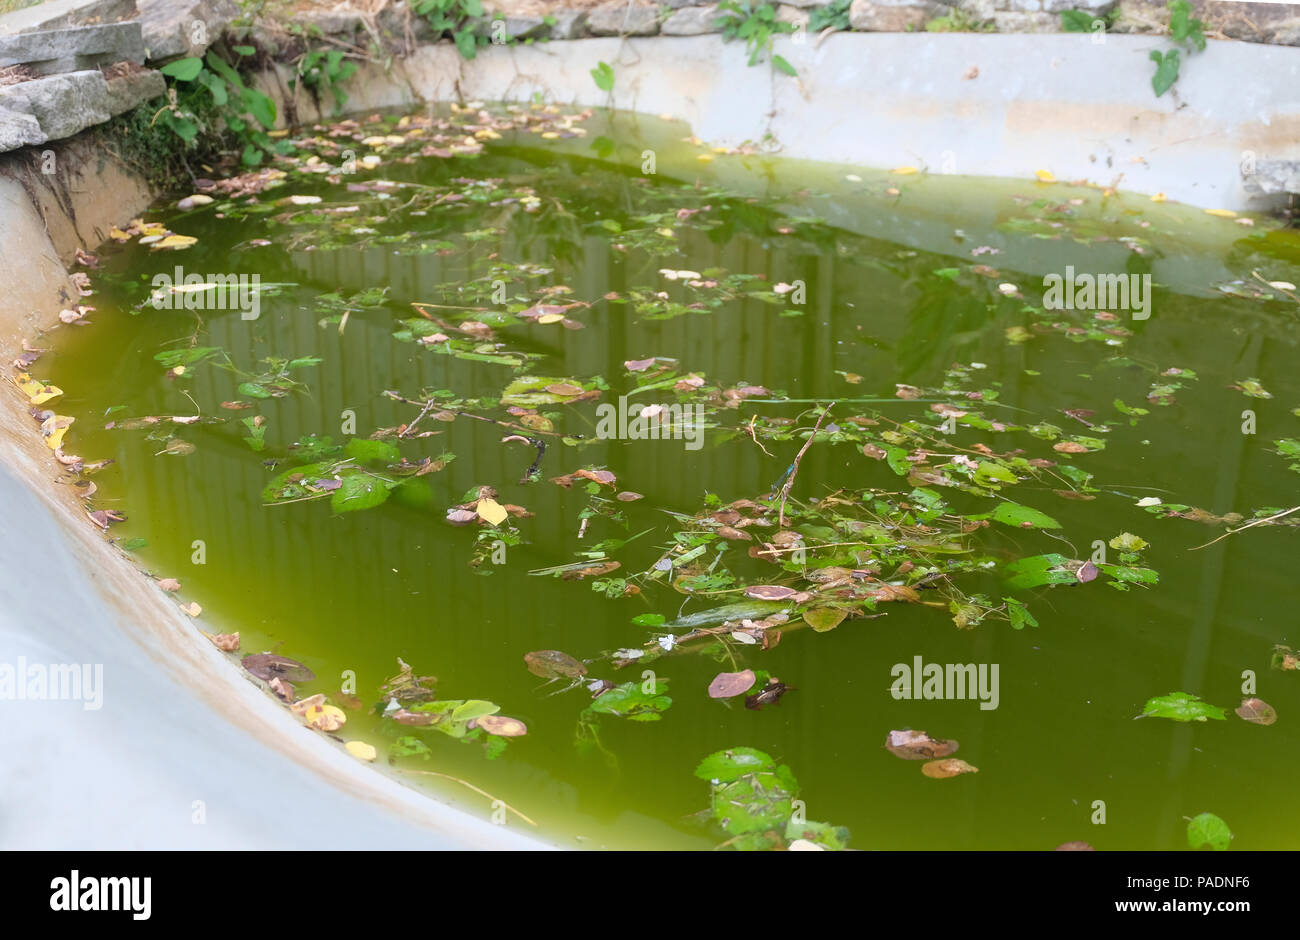 Neglected, stagnant garden pond turned green in hot weather. Rings around edge show evaporation taking place Stock Photo